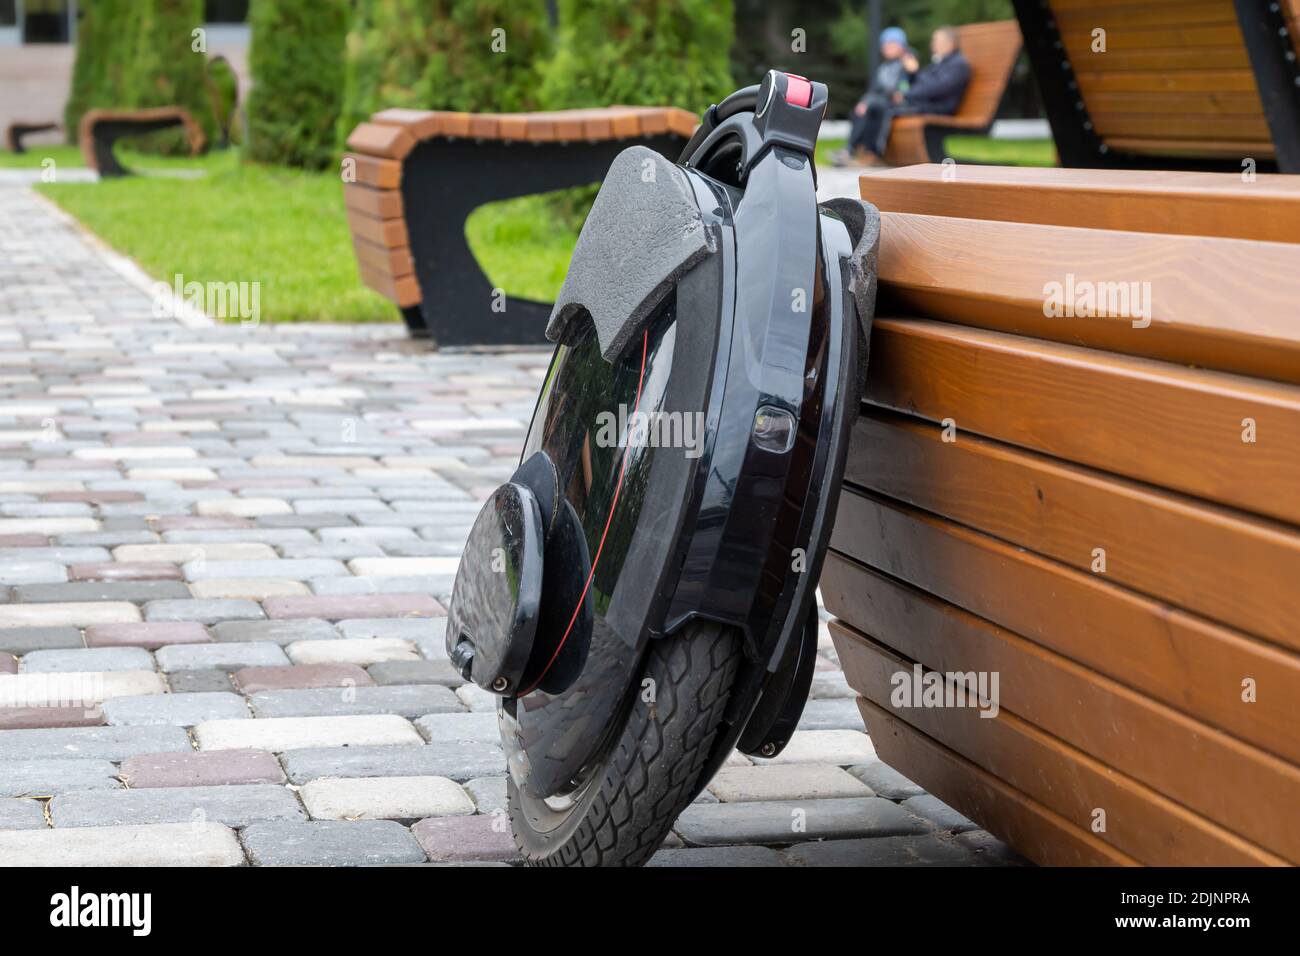 Black electric mono wheel, innovative personal vehicle, self-balancing electric unicycle, ecological urban transport of the future near a wooden bench Stock Photo